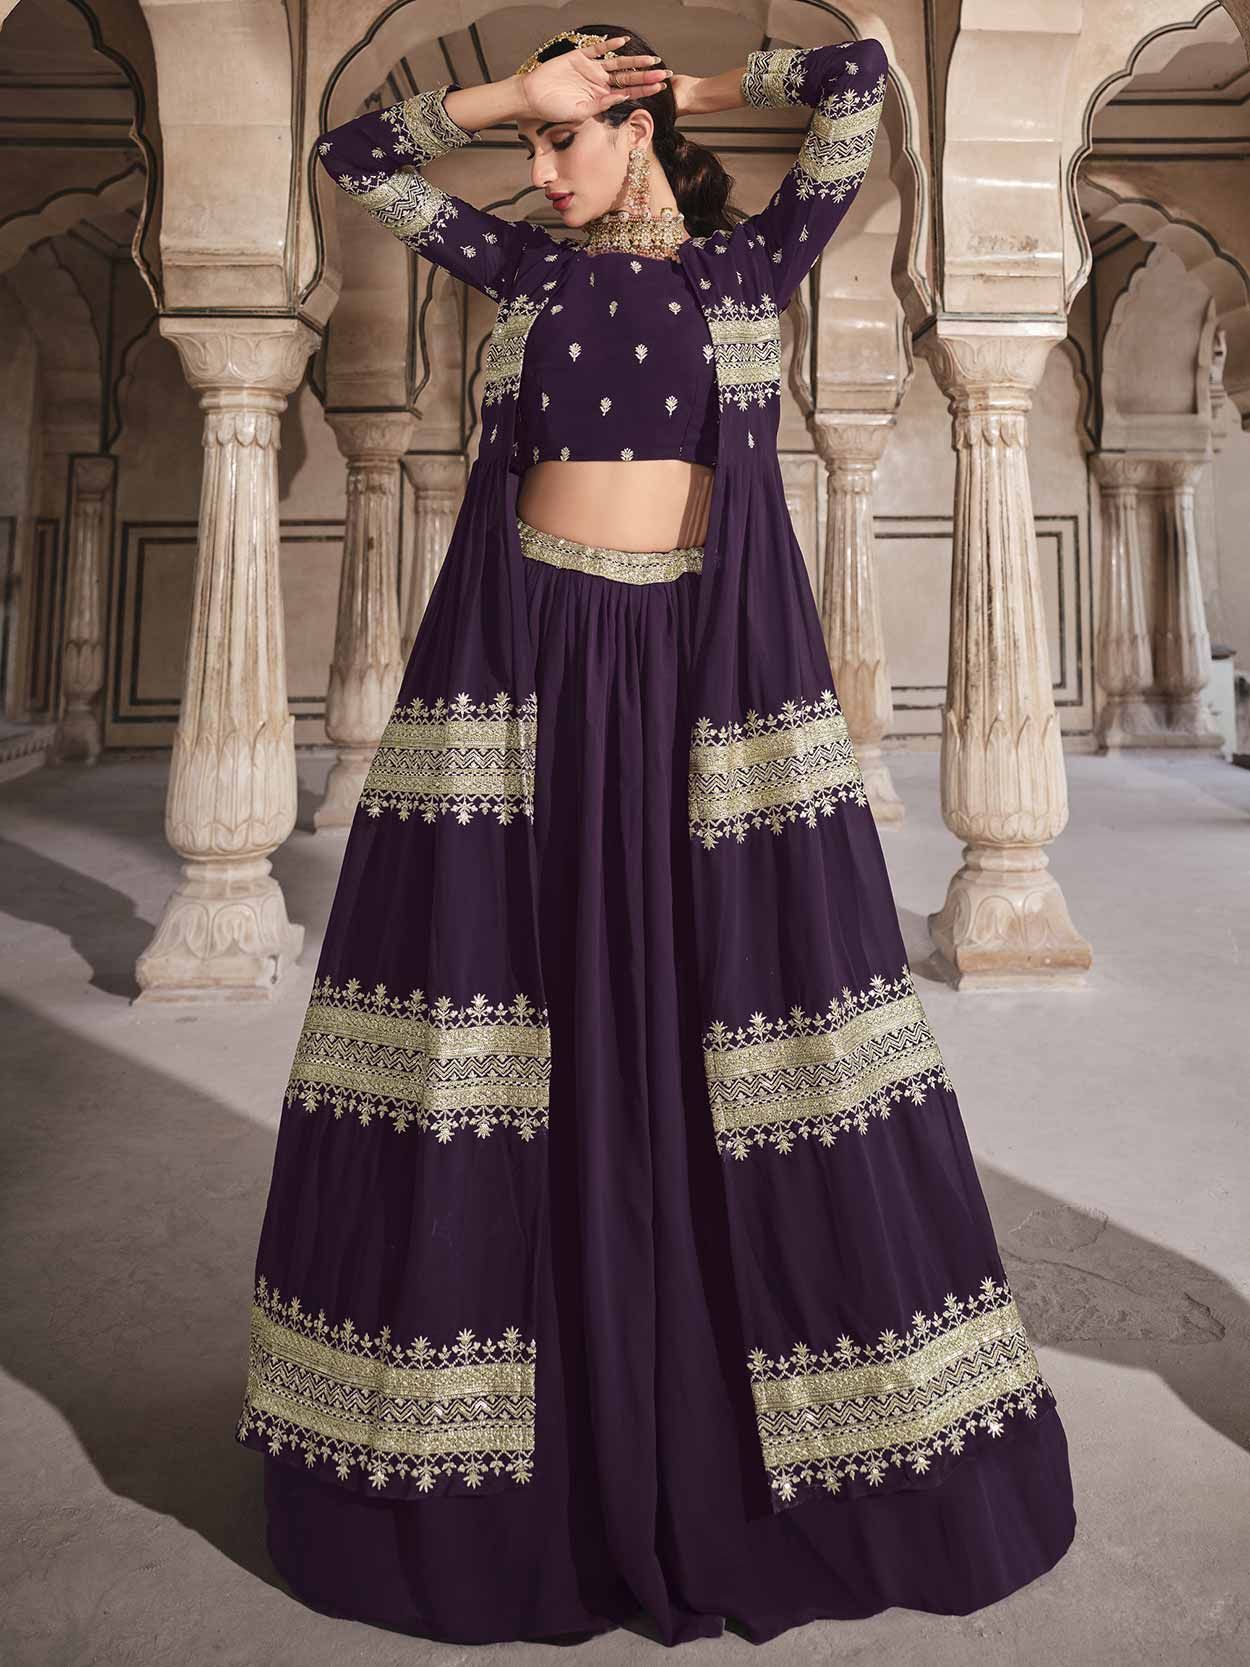 Buy Ujithra-Wine colour designer ready to wear wedding lehenga with zari  embroidery and long heavy embroided shrug by Prrathaa at Amazon.in